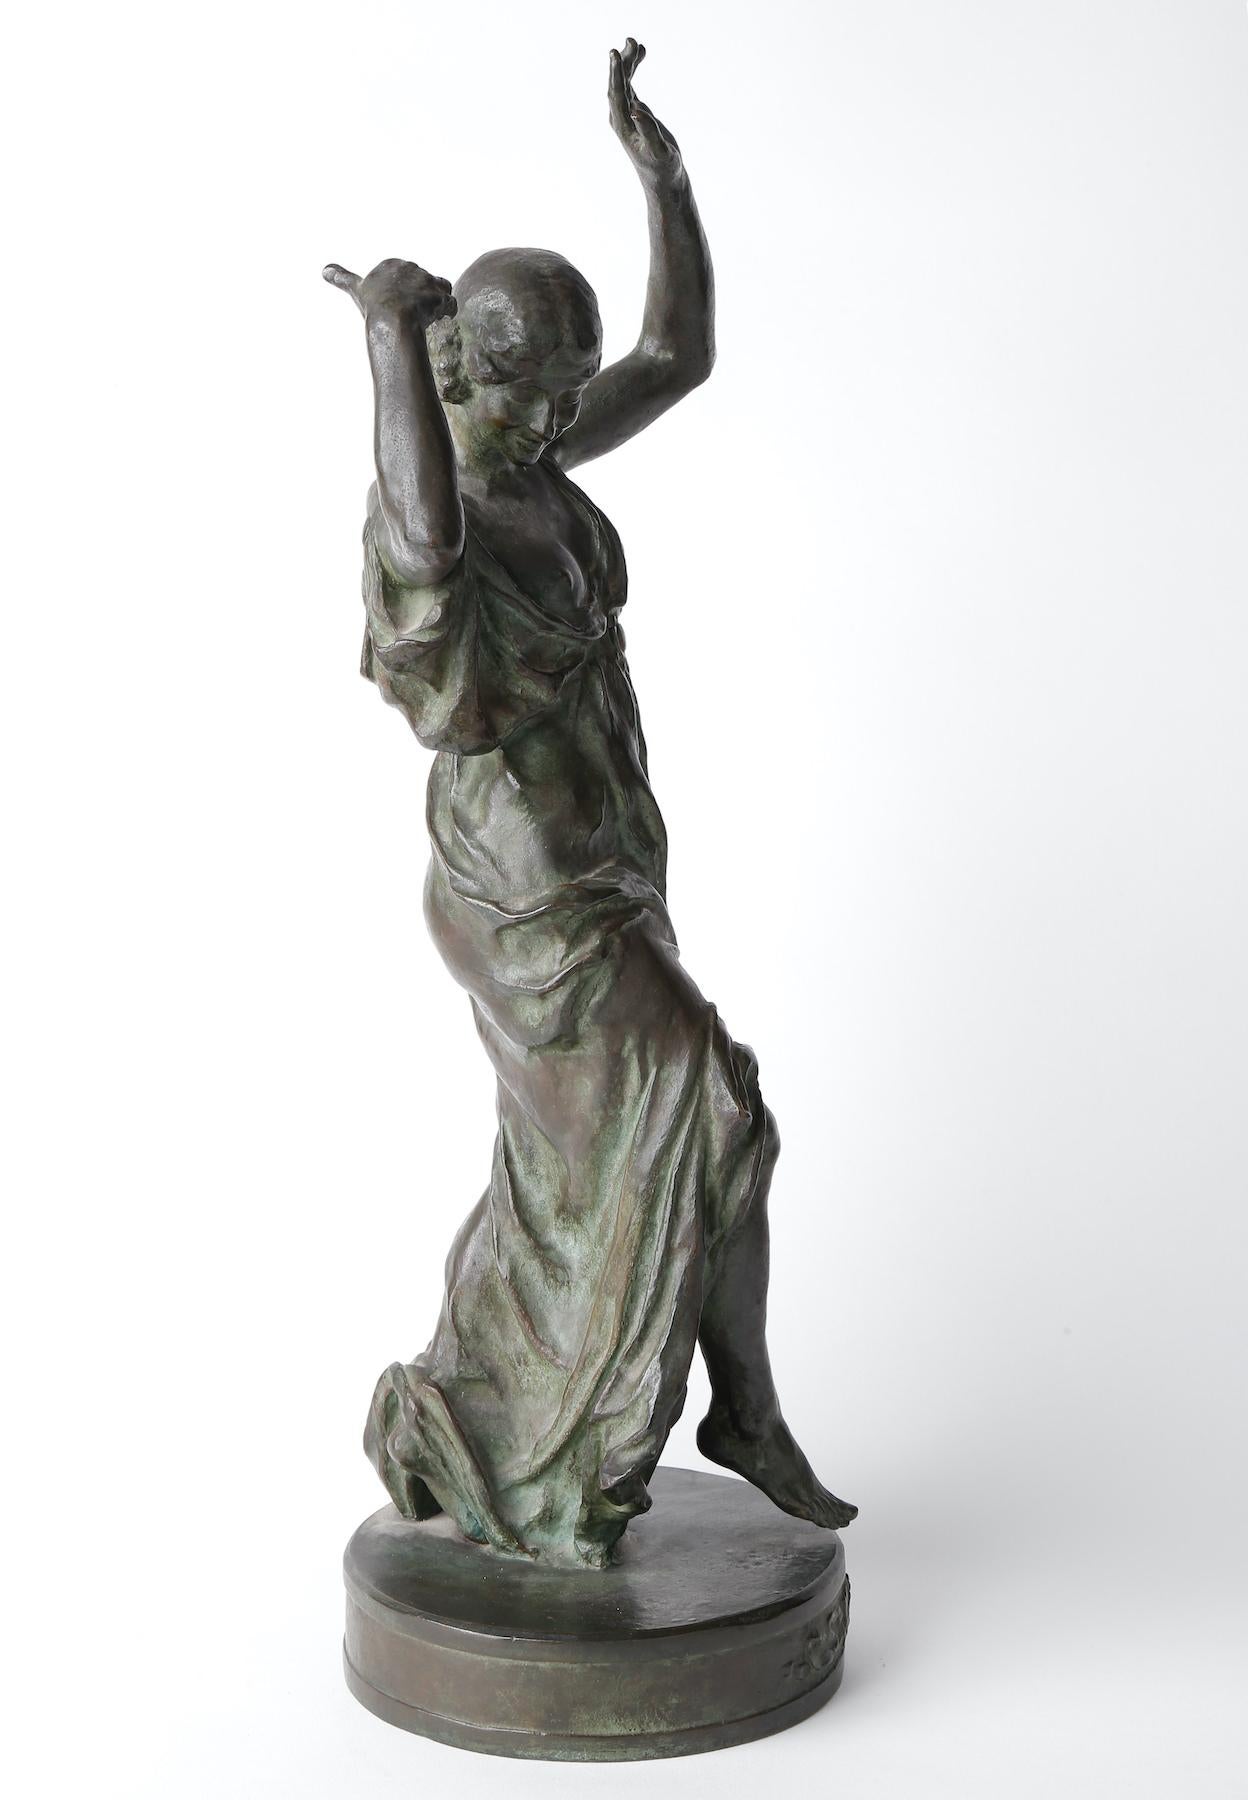 Louis Armand Bardery (French, 1879-1952)
Muse of Dance
Bronze with green and brown patination
Signed and stamped with foundry mark
18 x 6 inches

Louis Armand Bardery was a student of Injalbert and Vital Cornu at the Beaux-Arts in Paris. 
He